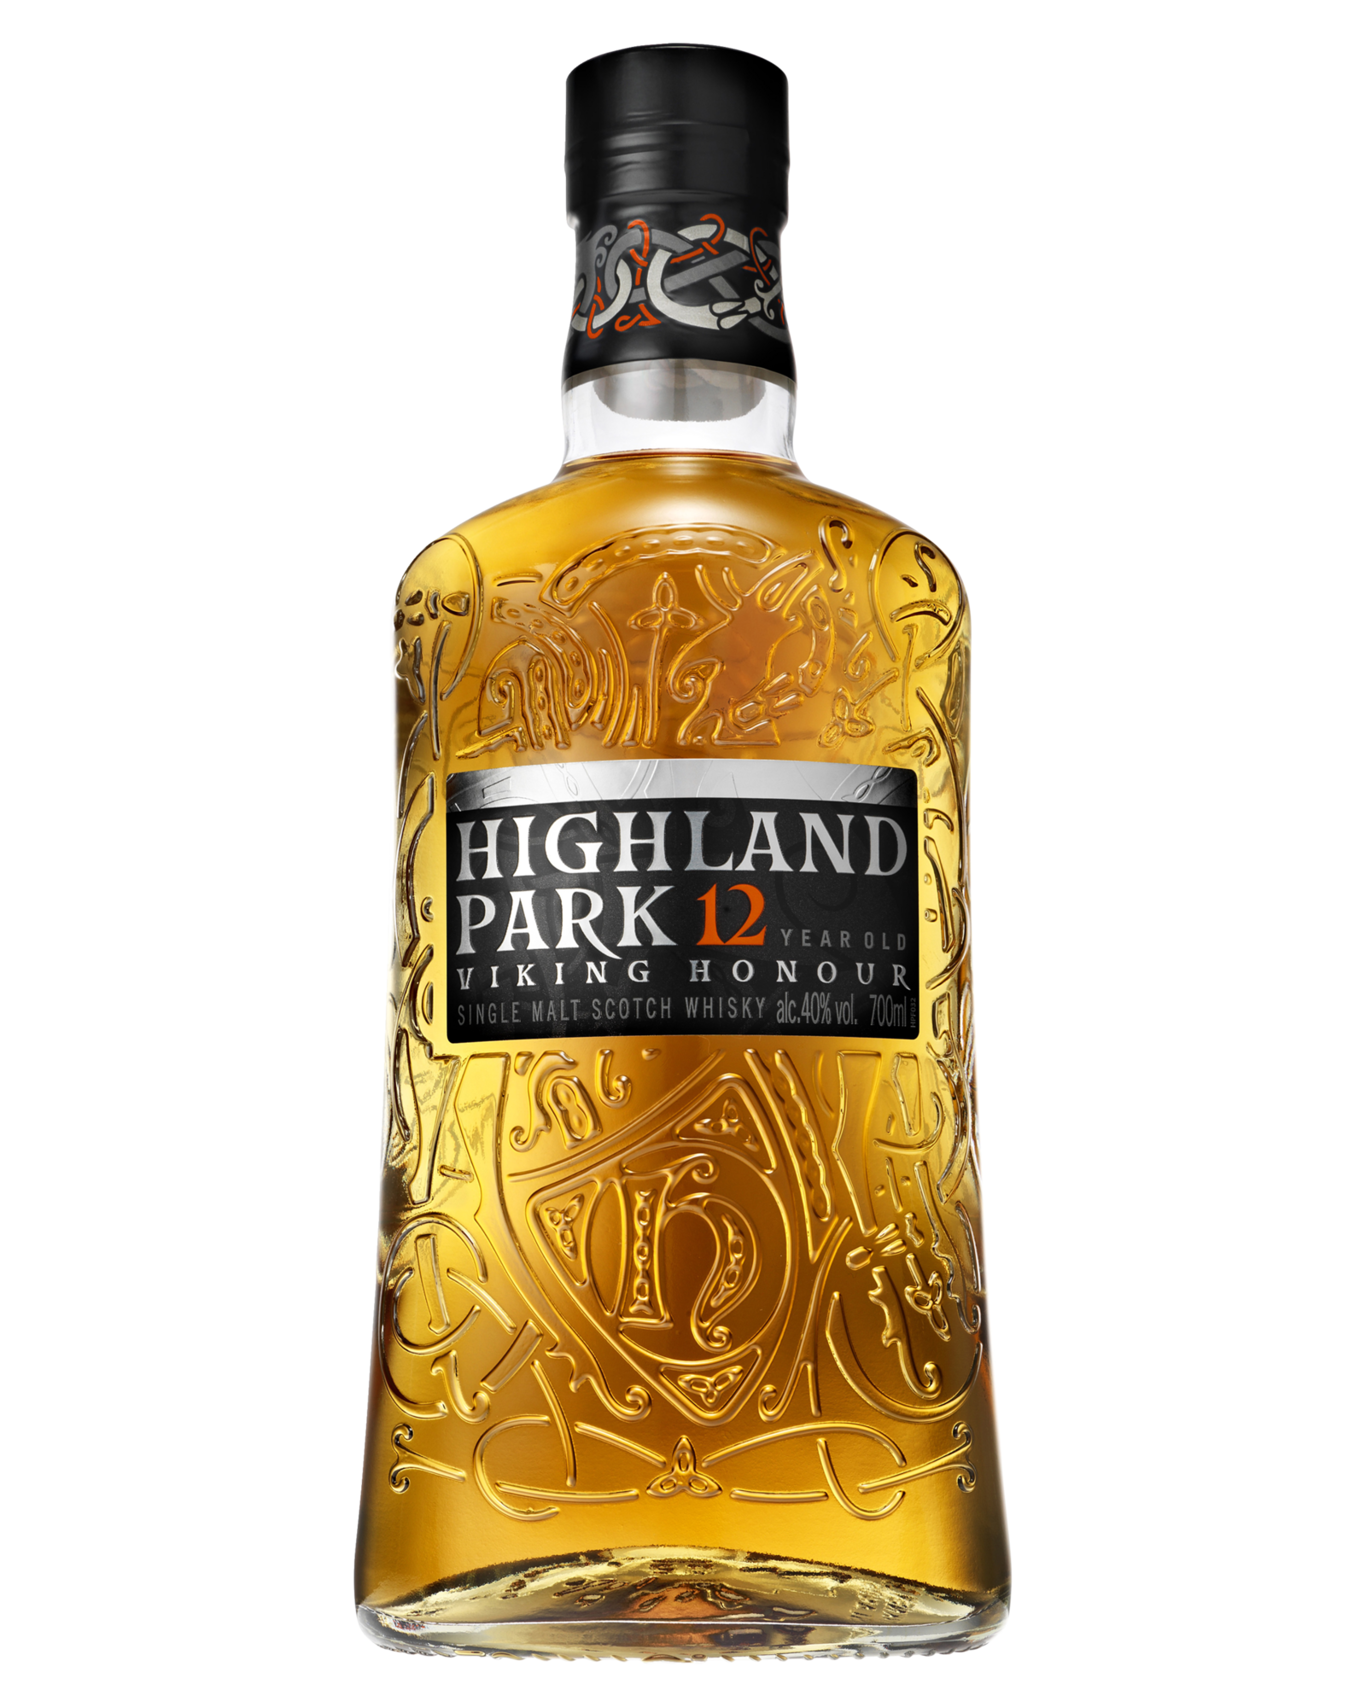 Highland Park 12 Year Old is chill filtered at a higher temperature of 4 degrees Celsius.